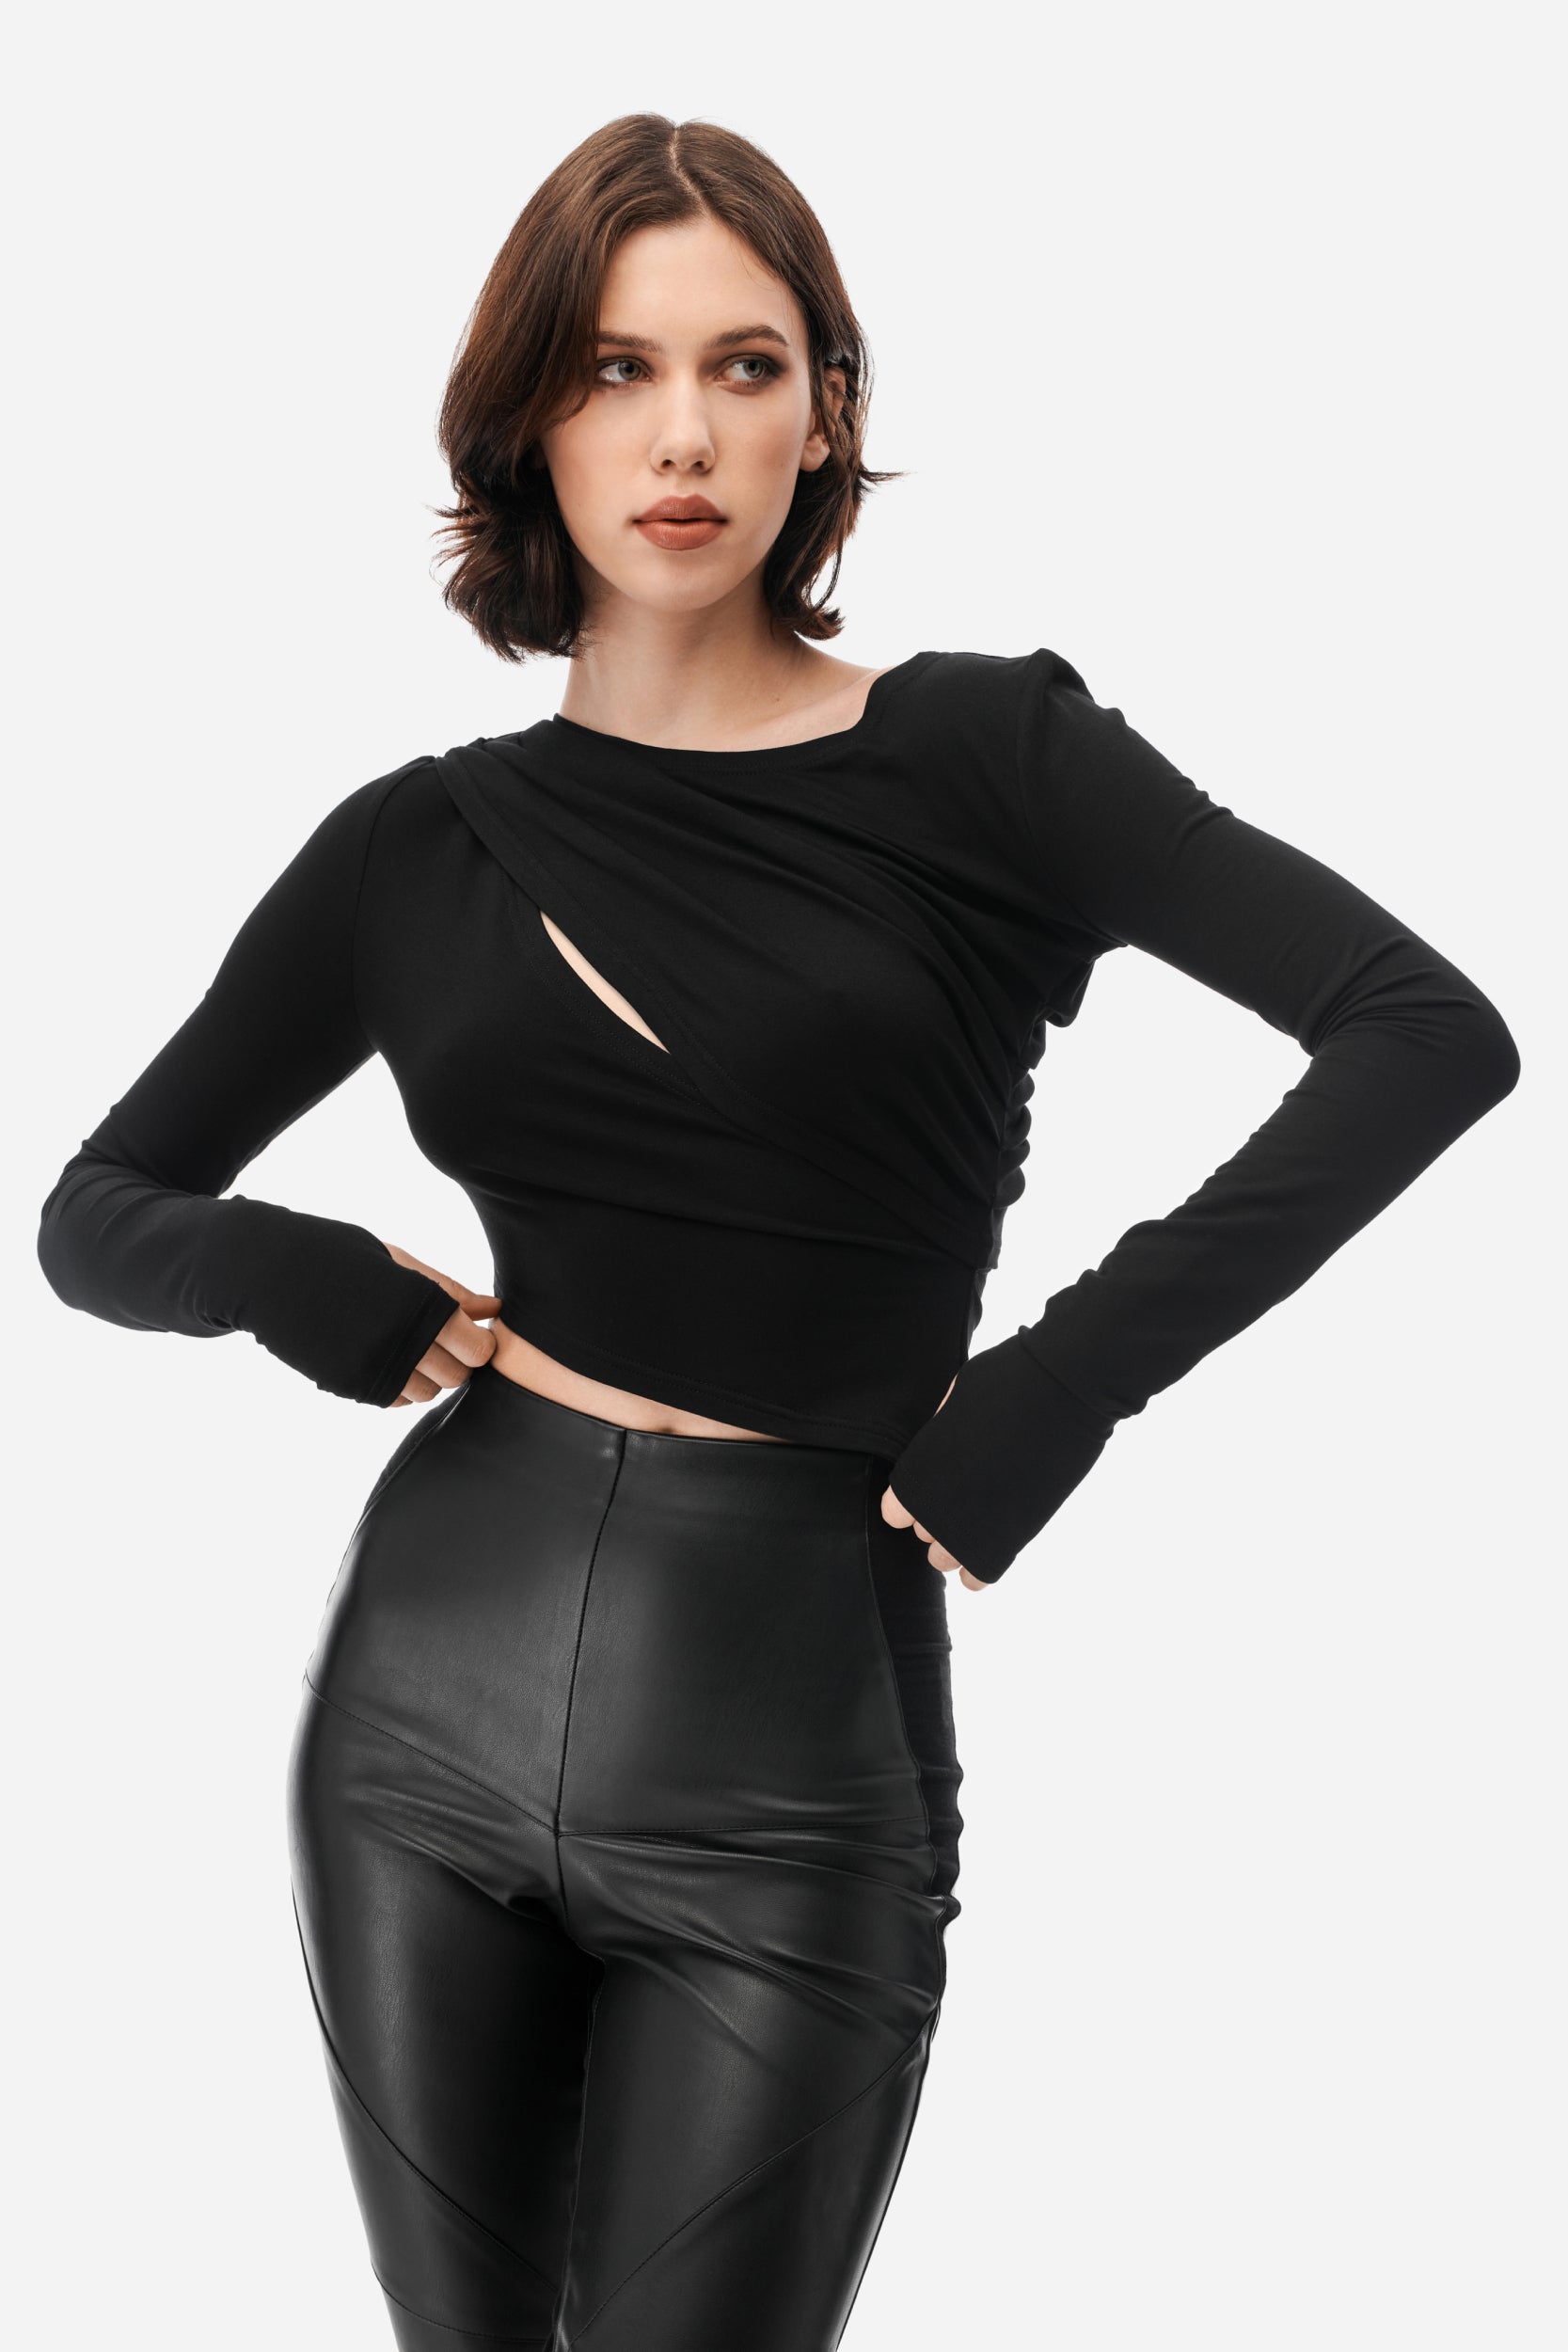 Obsidian Cut-out Top